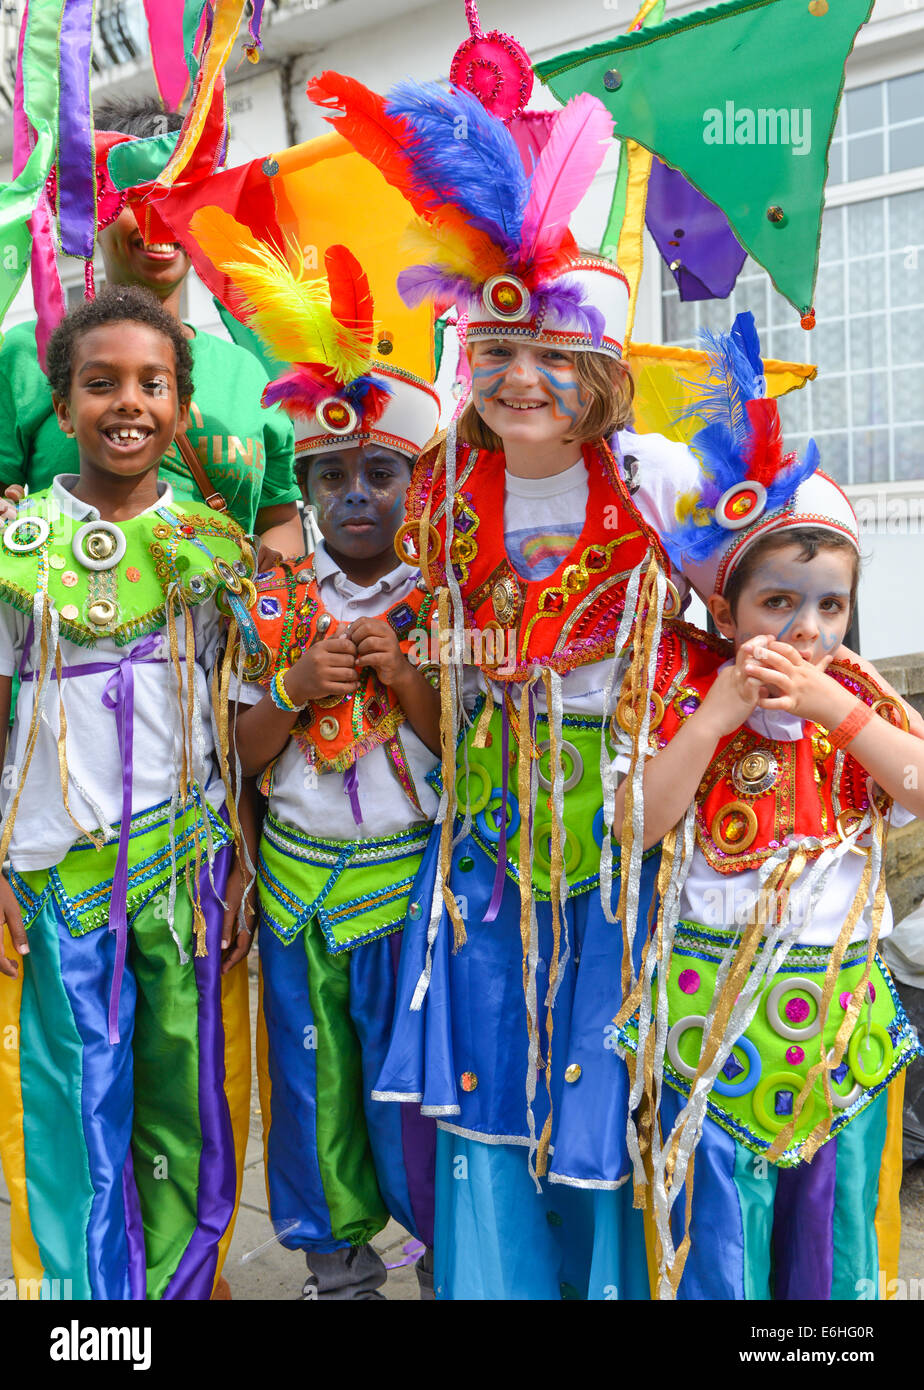 Notting Hill, London, UK. 24th August 2014. Four children in costume at the  parade. Sunday is Children's Day at the Notting Hill Carnival of Carribean  culture of music, dancing, food and drink.